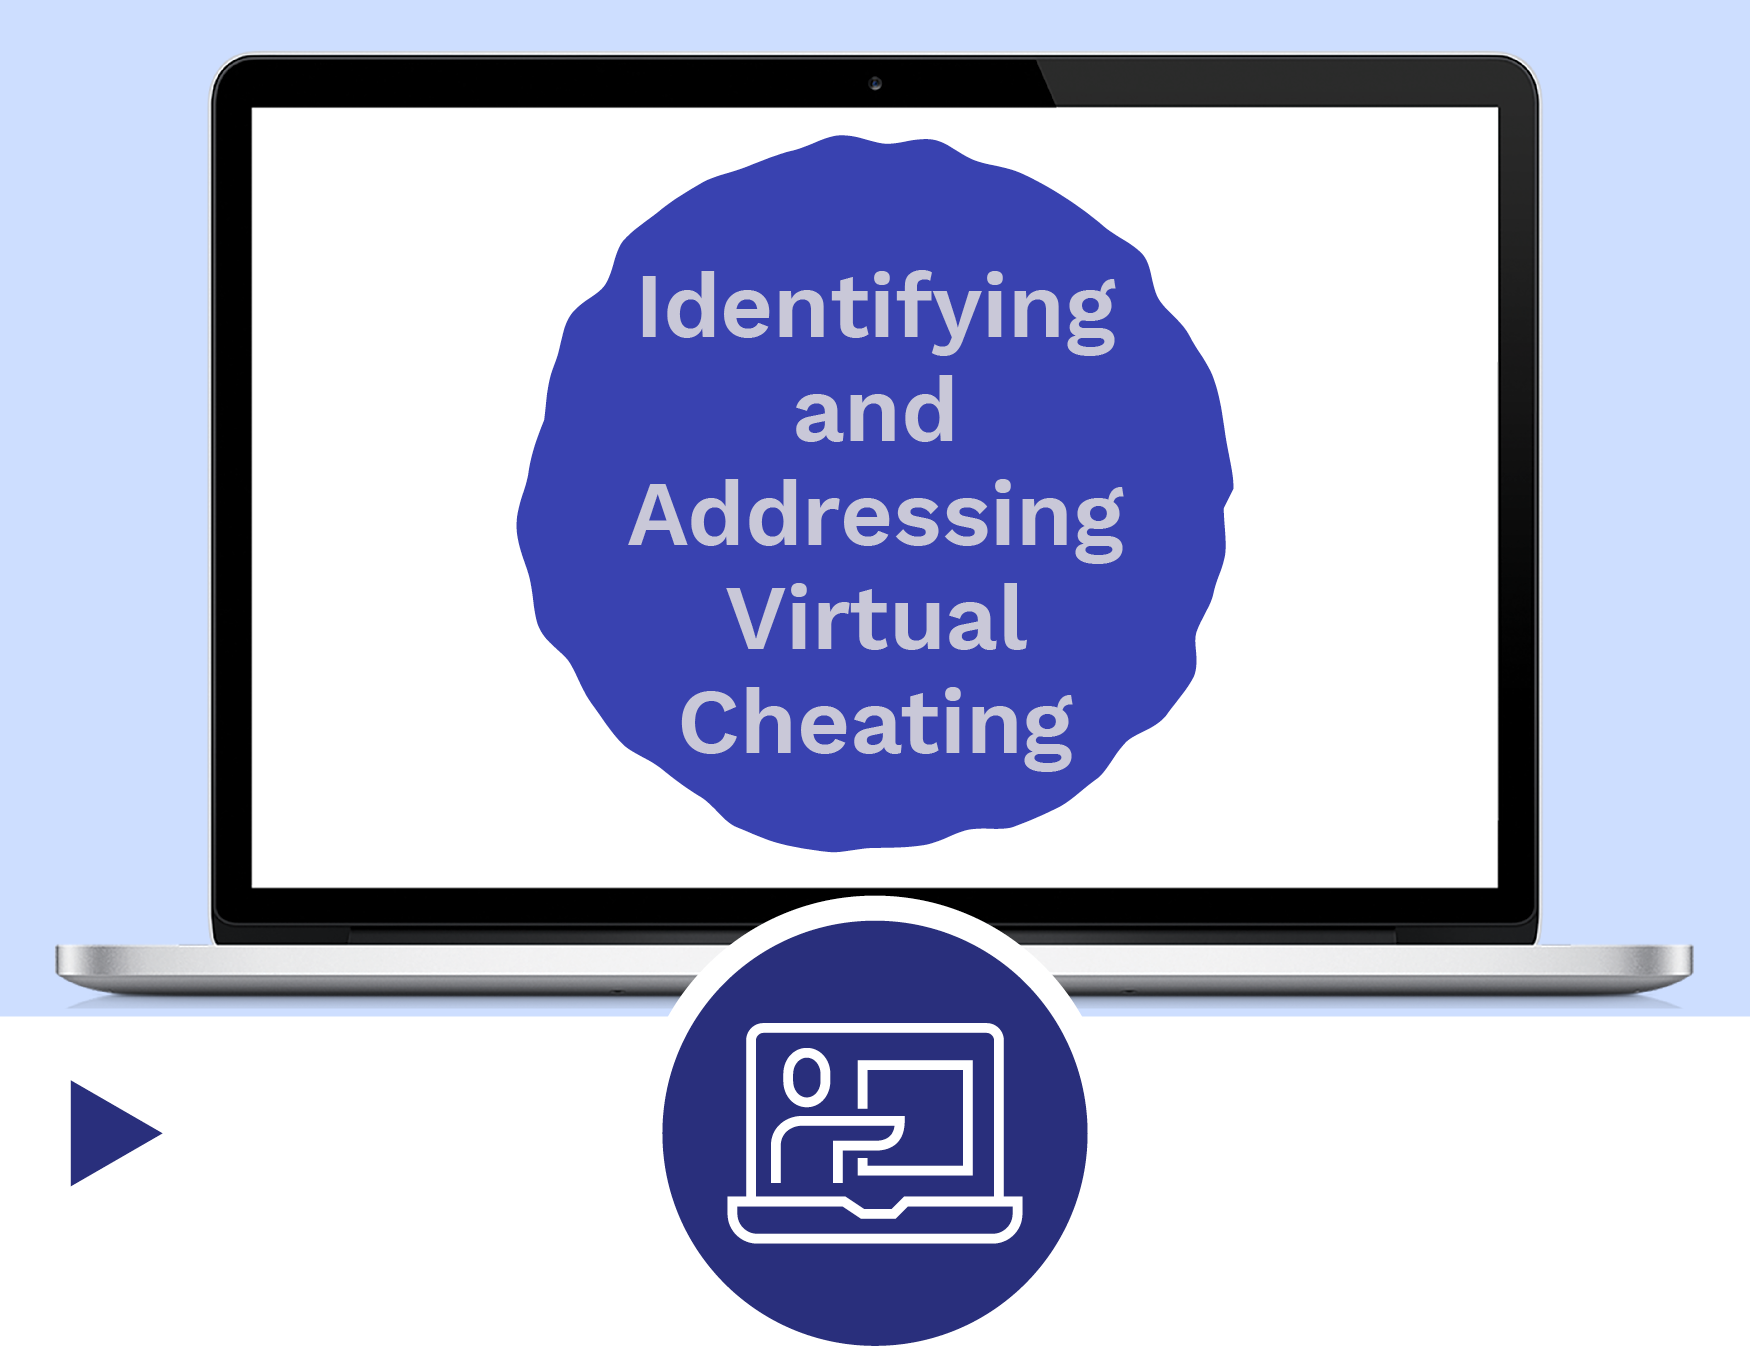 Identifying and Addressing Virtual Cheating